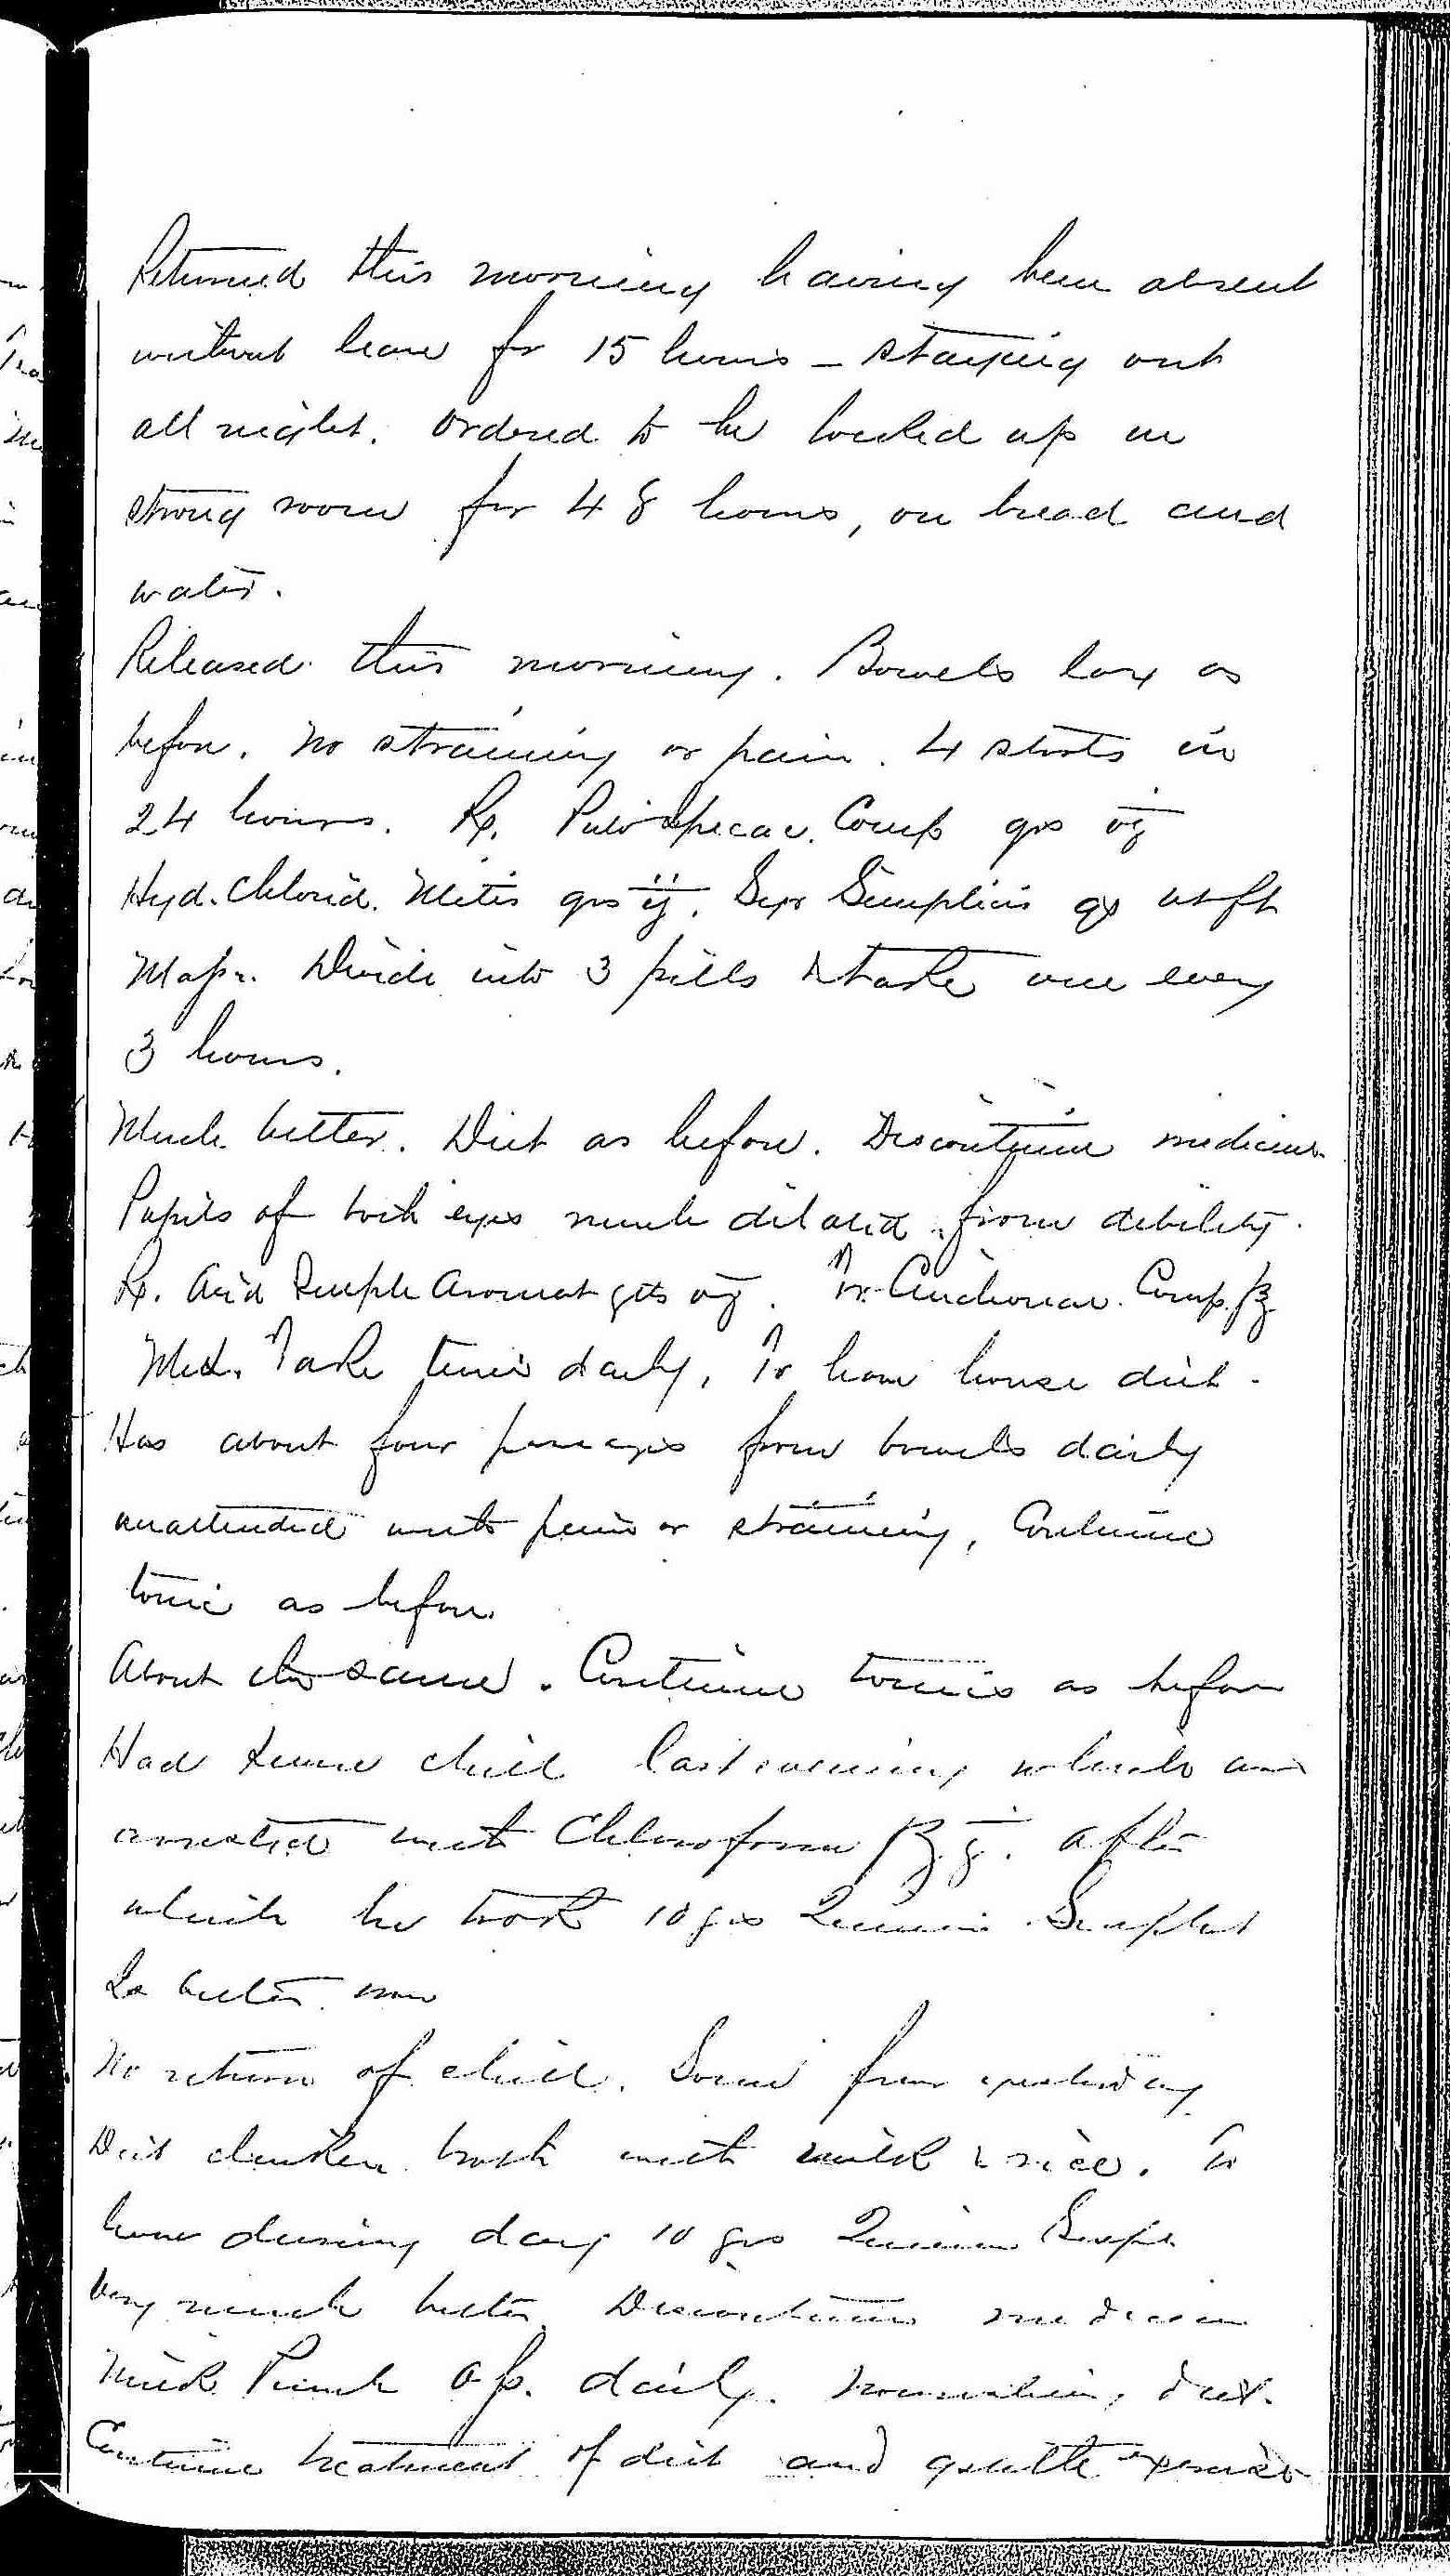 Entry for Edward Stevens (page 3 of 5) in the log Hospital Tickets and Case Papers - Naval Hospital - Washington, D.C. - 1868-69